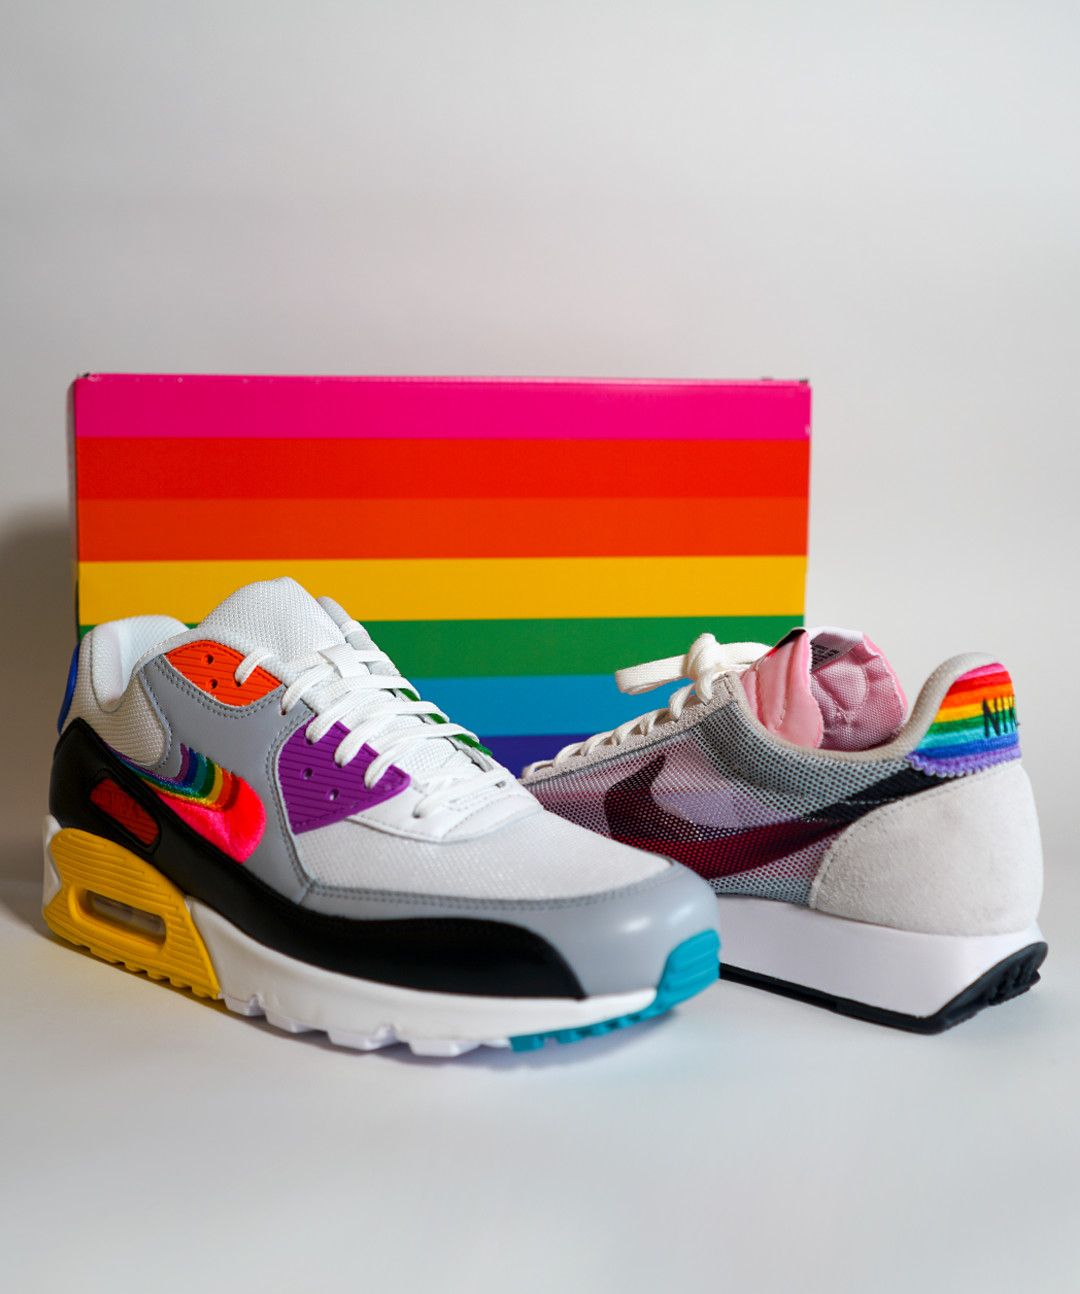 Nike BETRUE Air Max 90 and Tailwind 79 